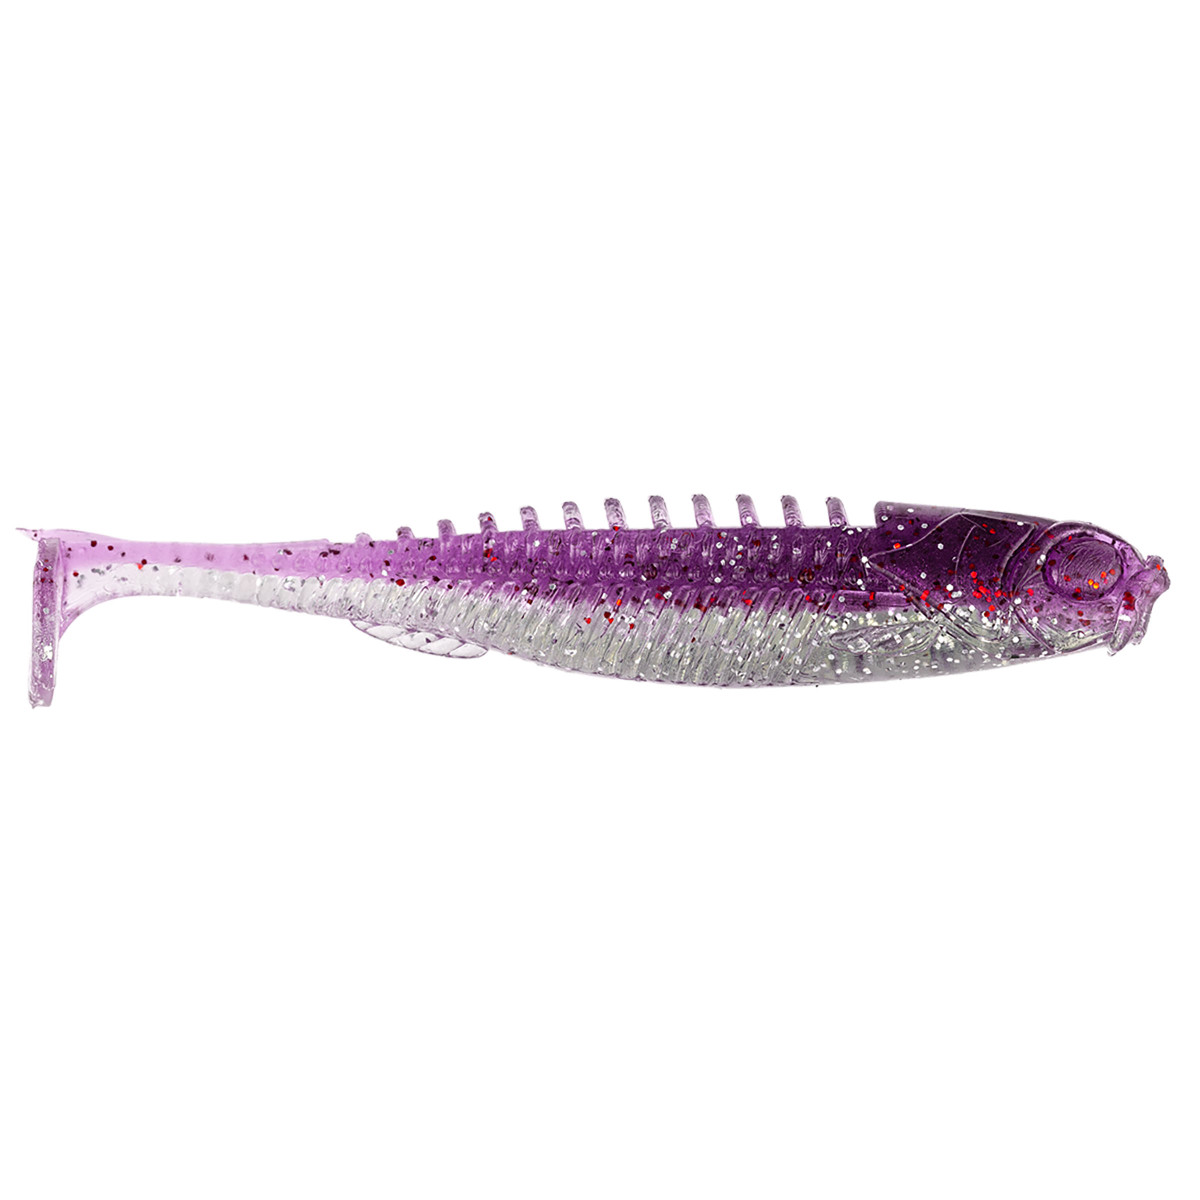 Northland Tackle Eye-Candy 3.5 Paddle Shad-Glo Moonlight